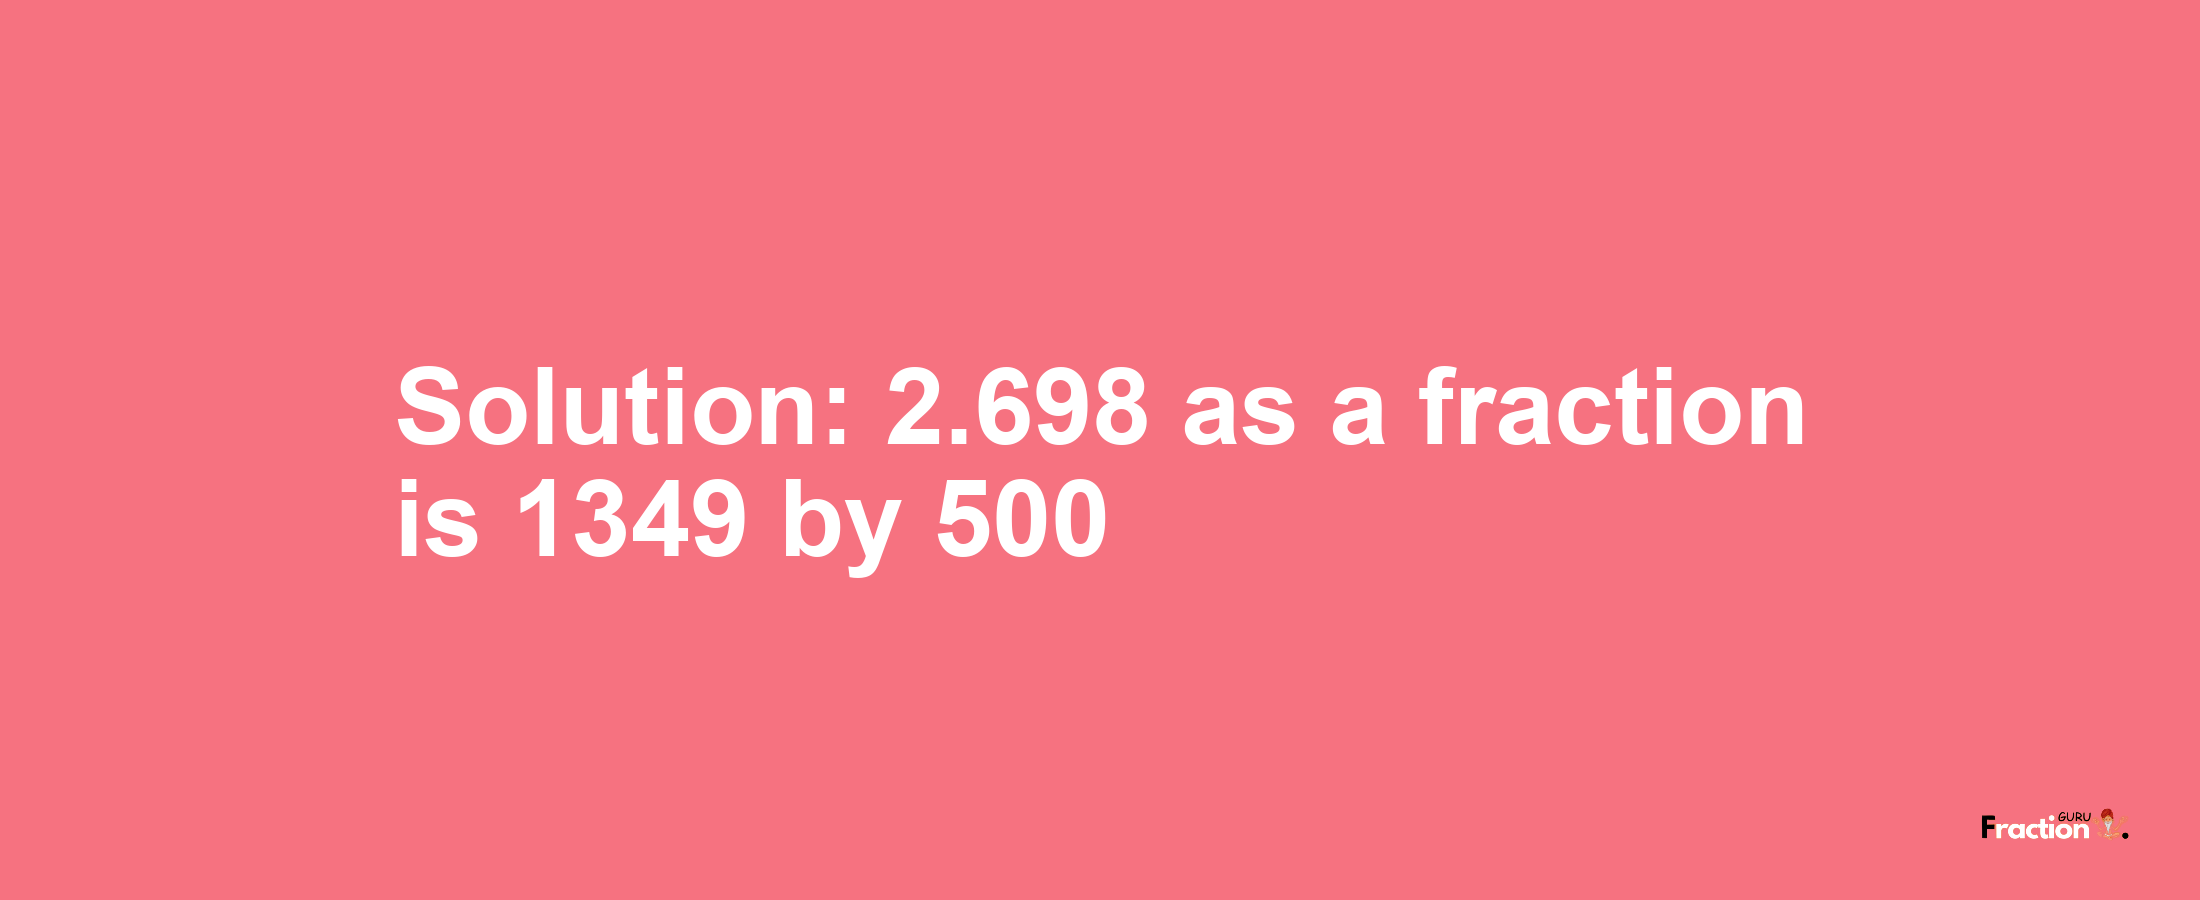 Solution:2.698 as a fraction is 1349/500